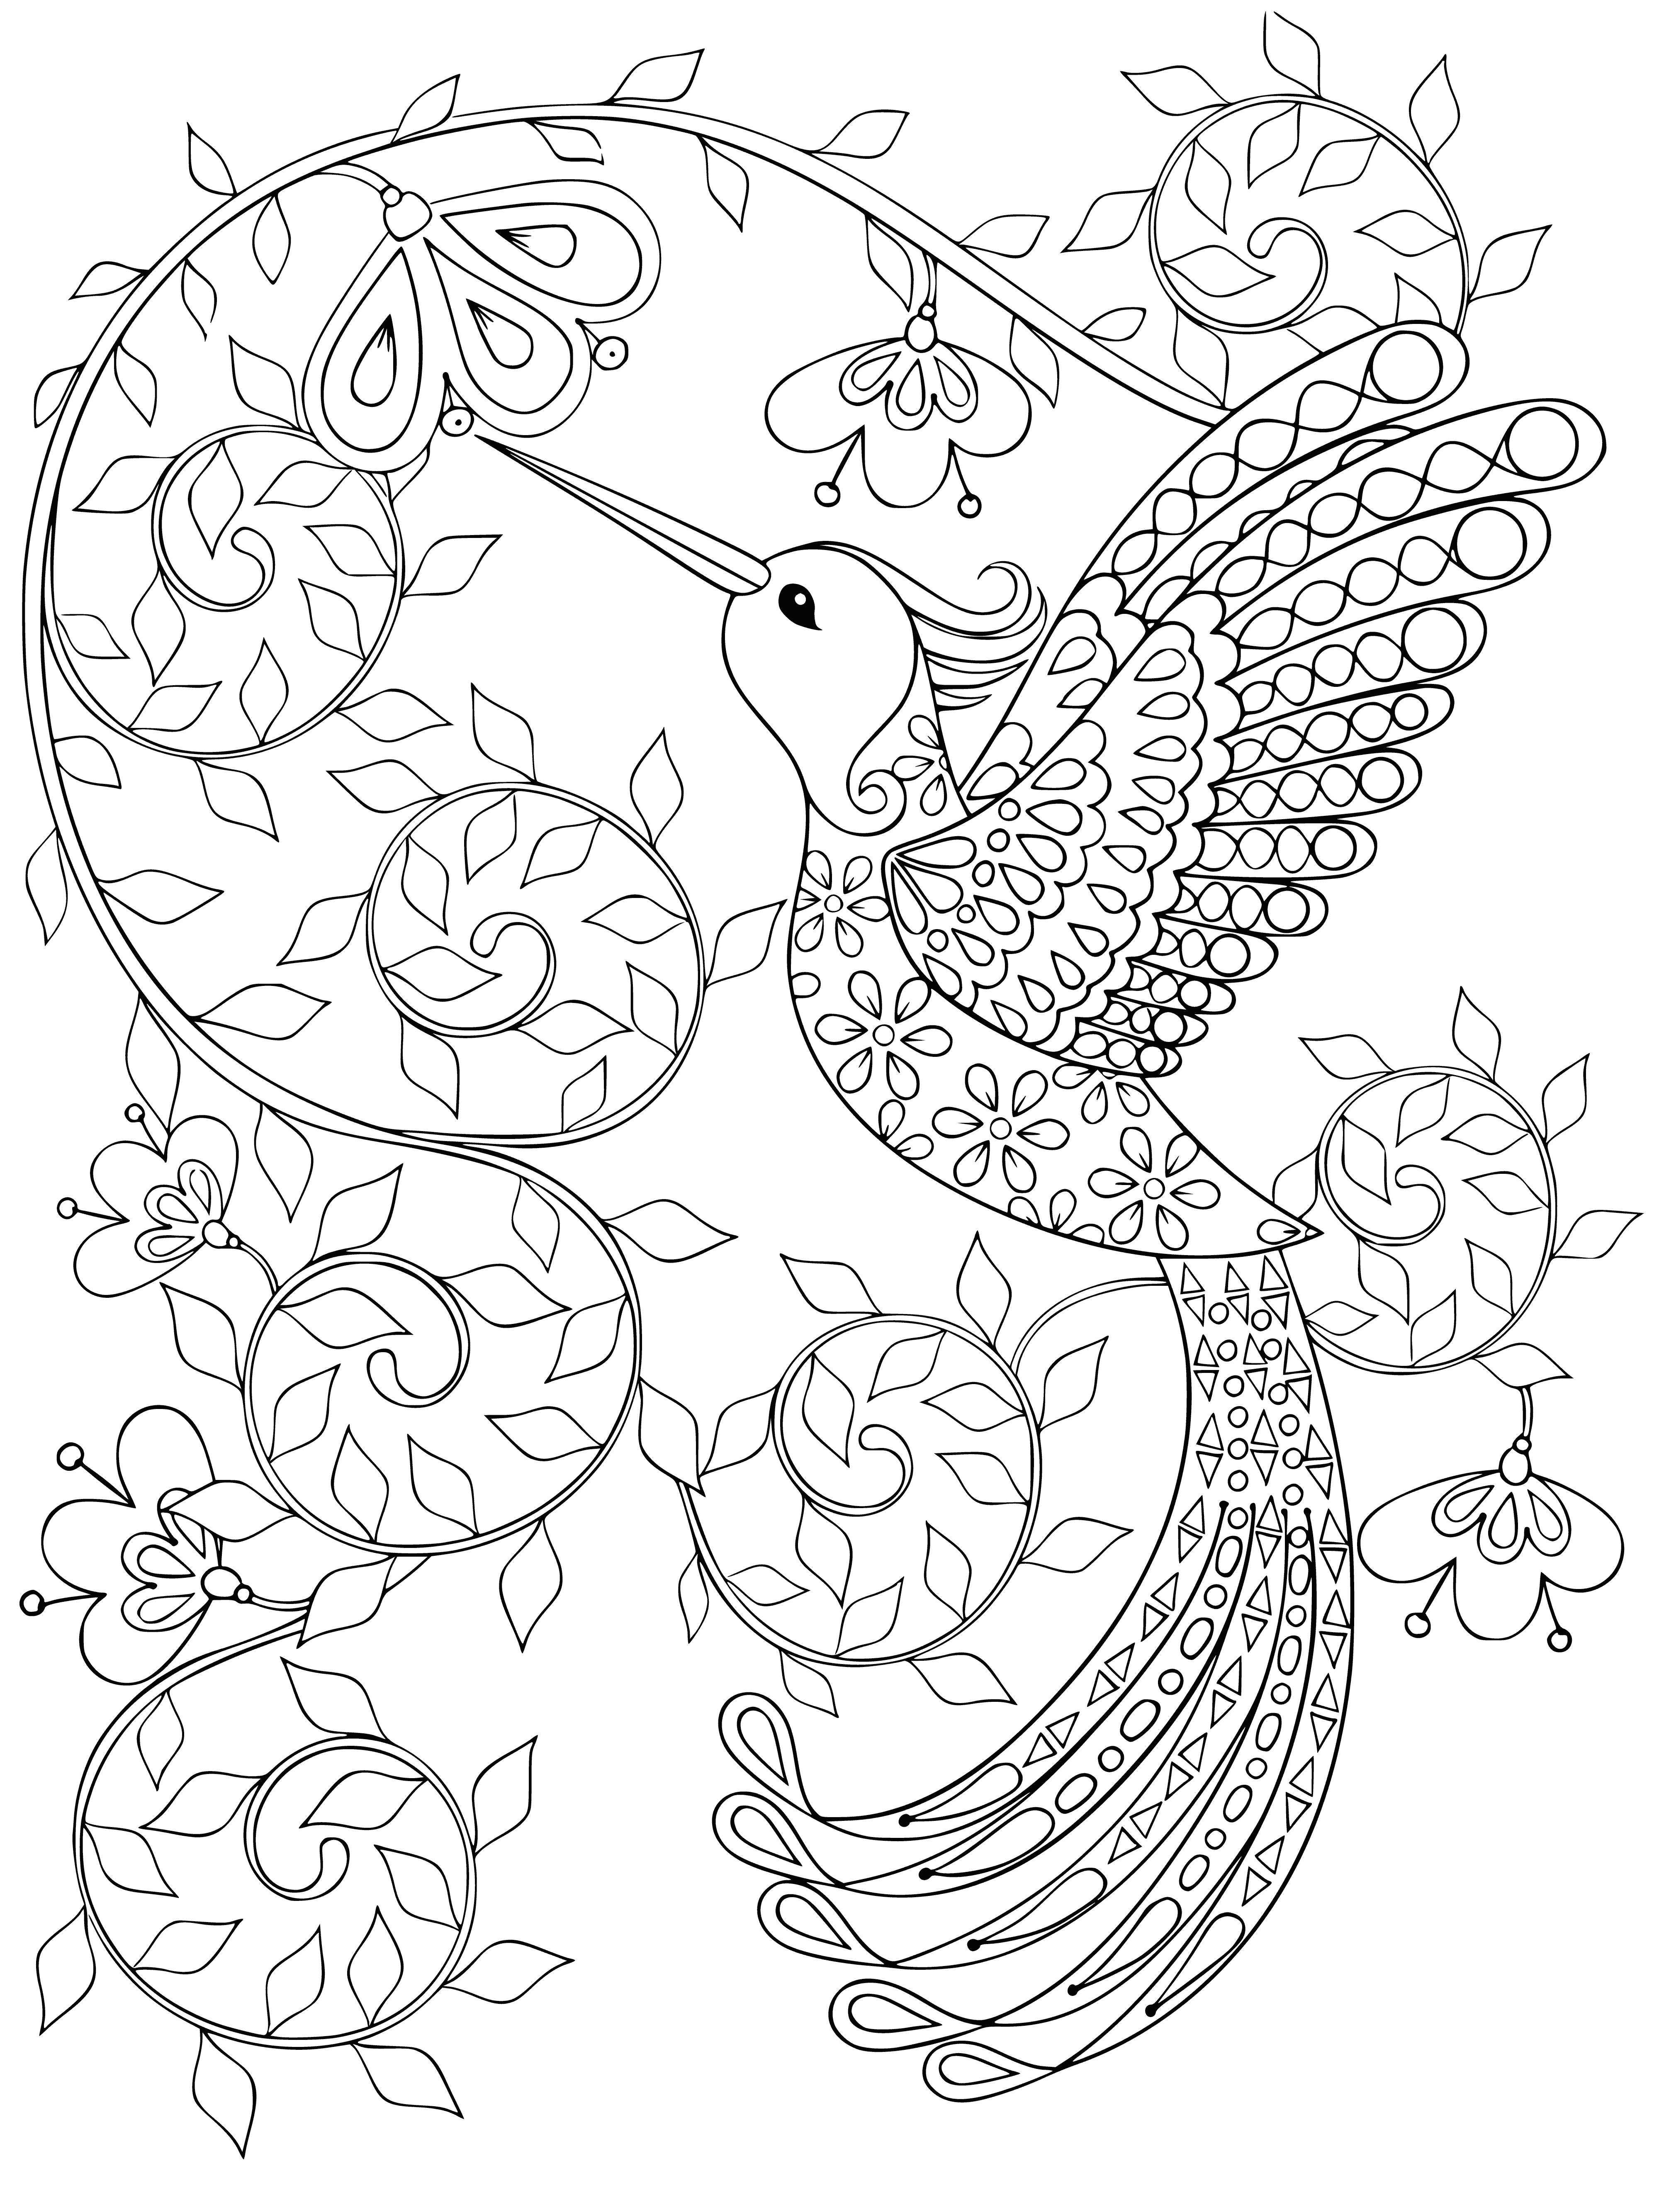 coloring page: Two hummingbirds flying around a tropical flower in a gradient of blues and greens. #coloringpage